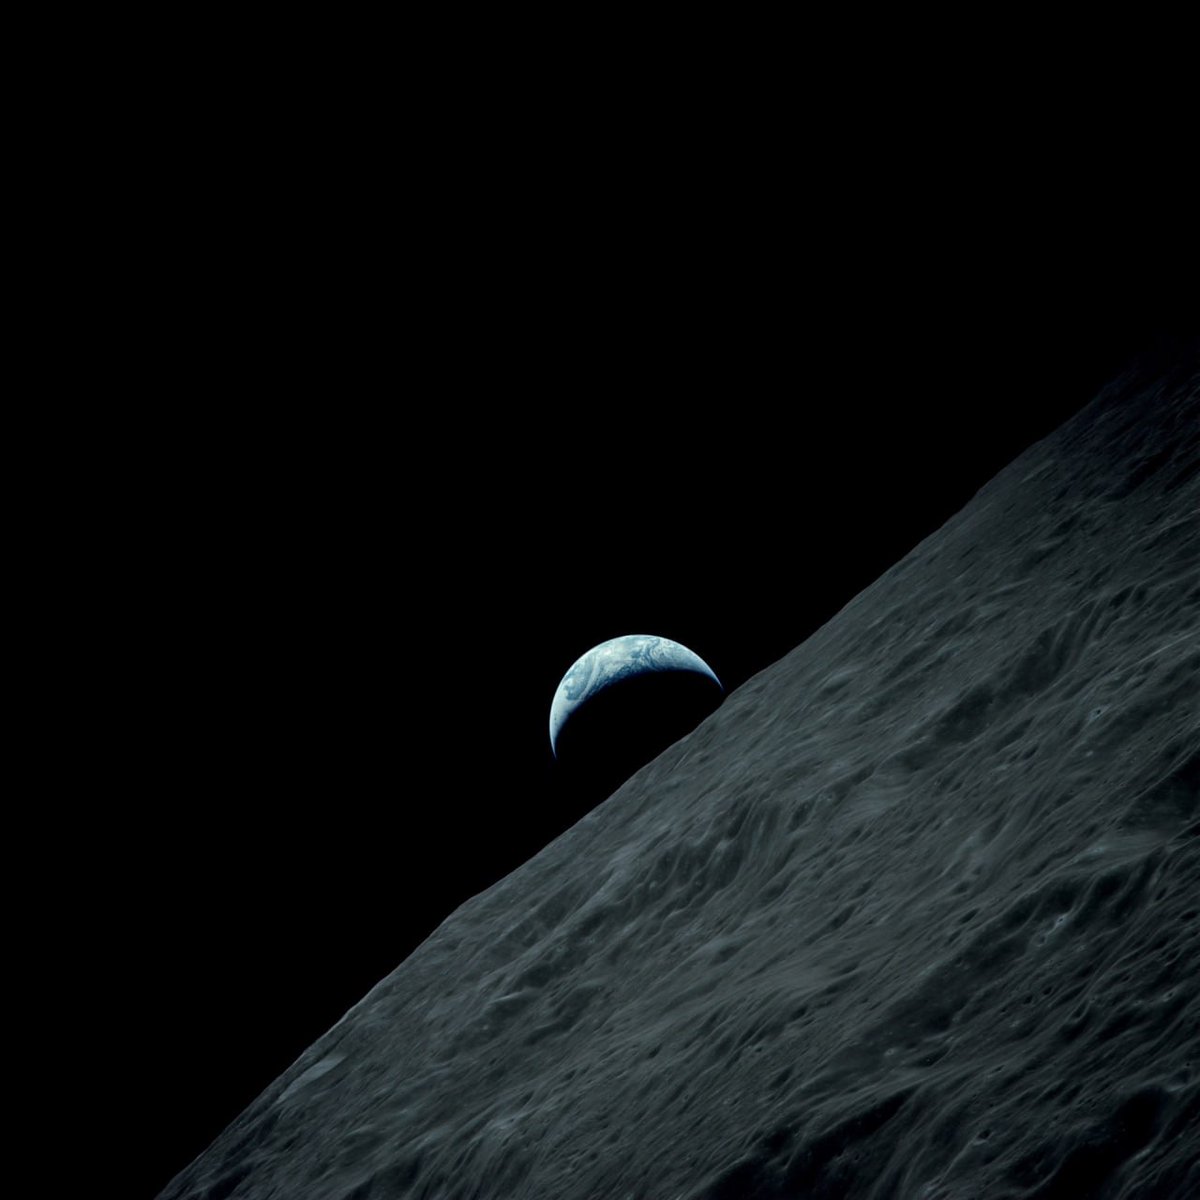 The crescent of the Earth rises above the horizon of the Moon. The footage was taken by the crew of the Apollo 17 expedition. December 1972 🌙

#Space #Cosmos #Moon #Earth #Apollo #Apollo17 #astronomy